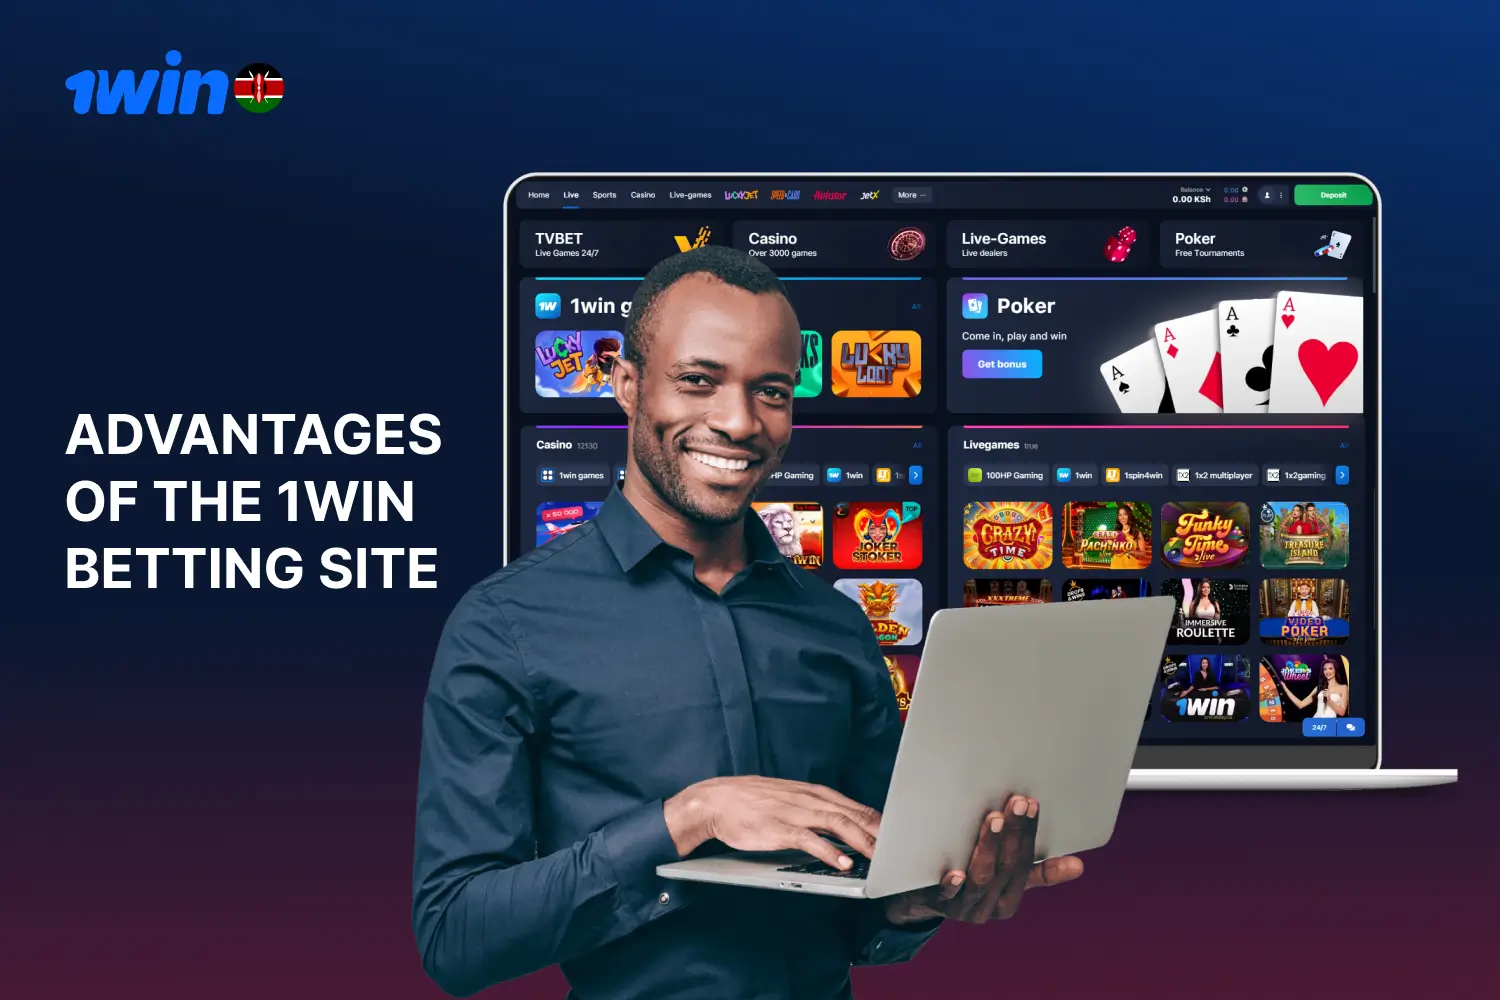 Kenyan bettors appreciate the benefits of 1win such as a variety of sports disciplines to bet on, high odds, convenient payment systems and many others